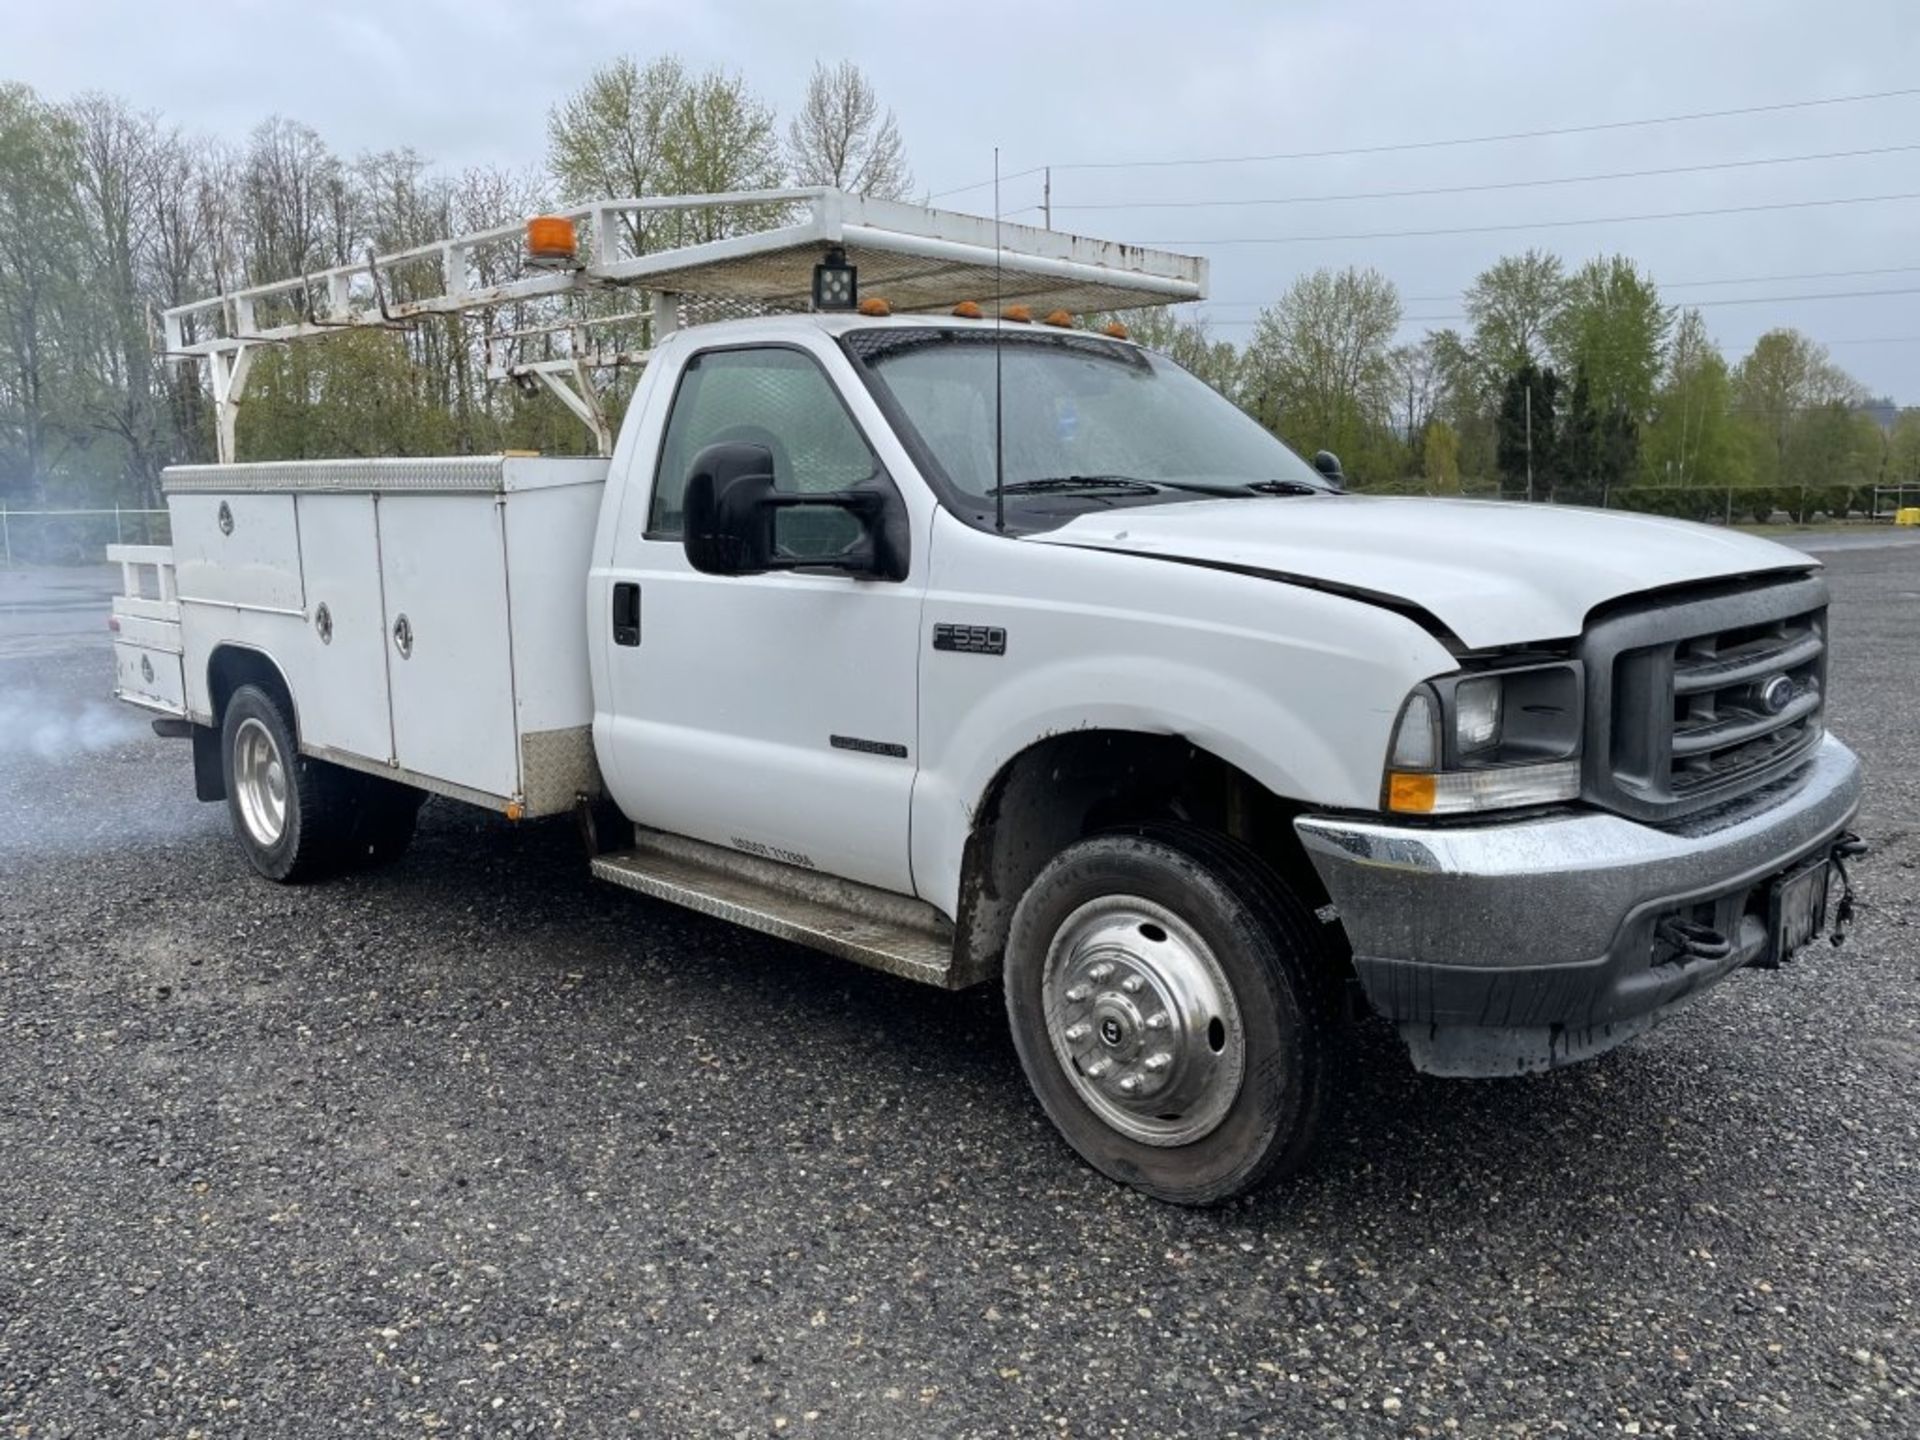 2002 Ford F550 XL SD Utility Truck - Image 2 of 27